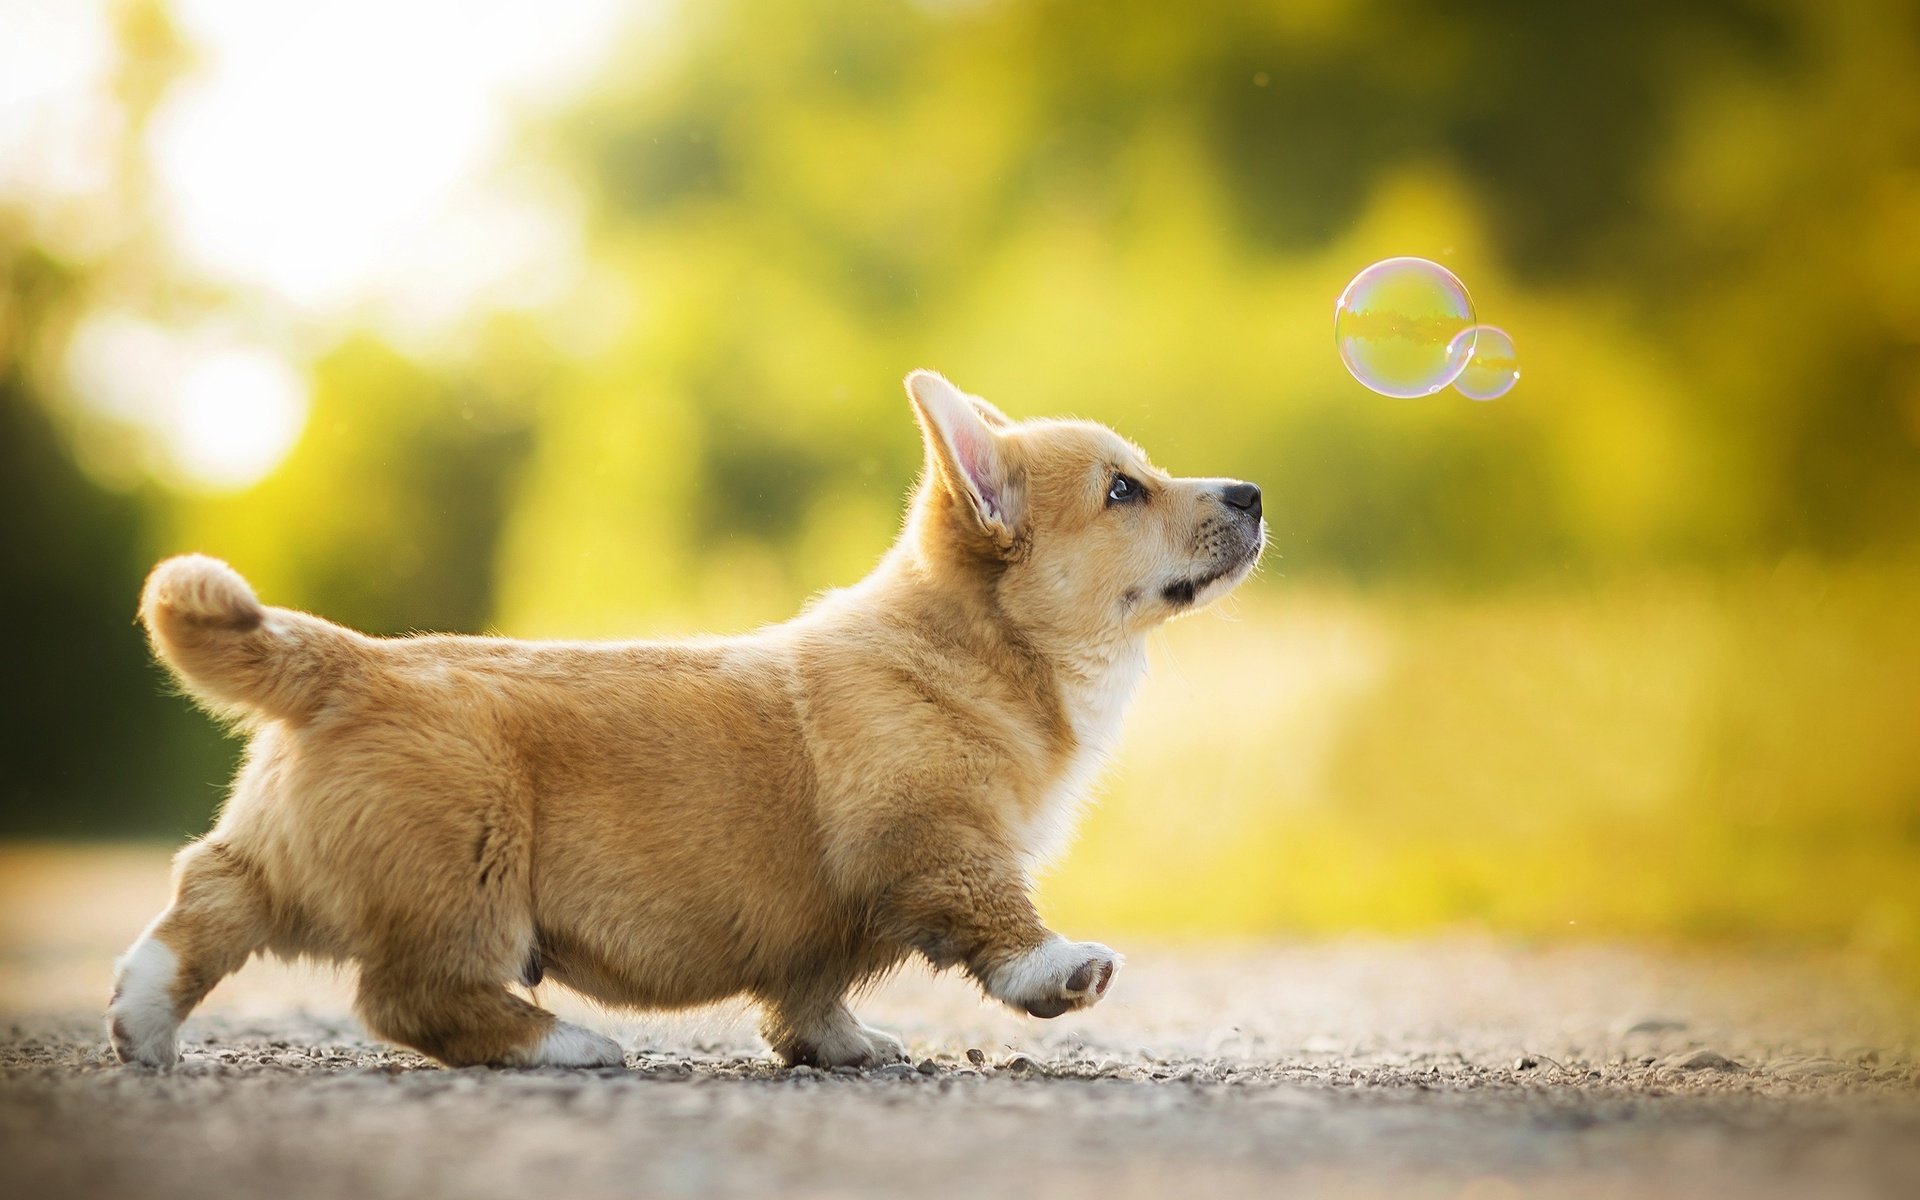 Download Wallpapers Welsh Corgi Puppy Bubbles Dogs For Desktop With Resolution 19x10 High Quality Hd Pictures Wallpapers